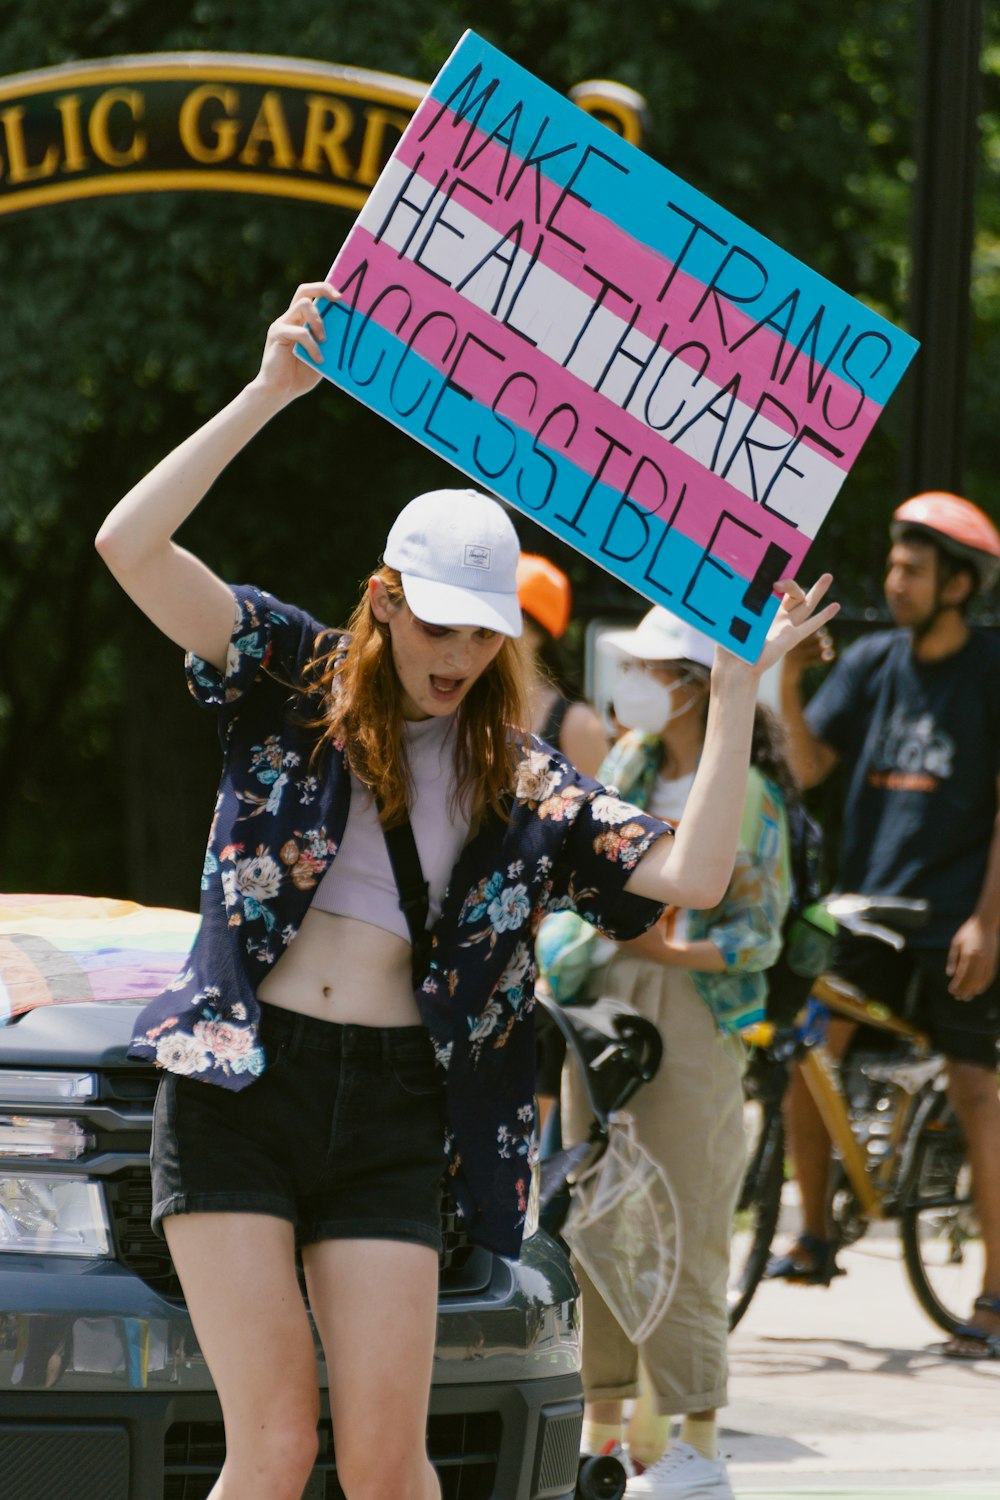 a woman holding a sign in front of a group of people